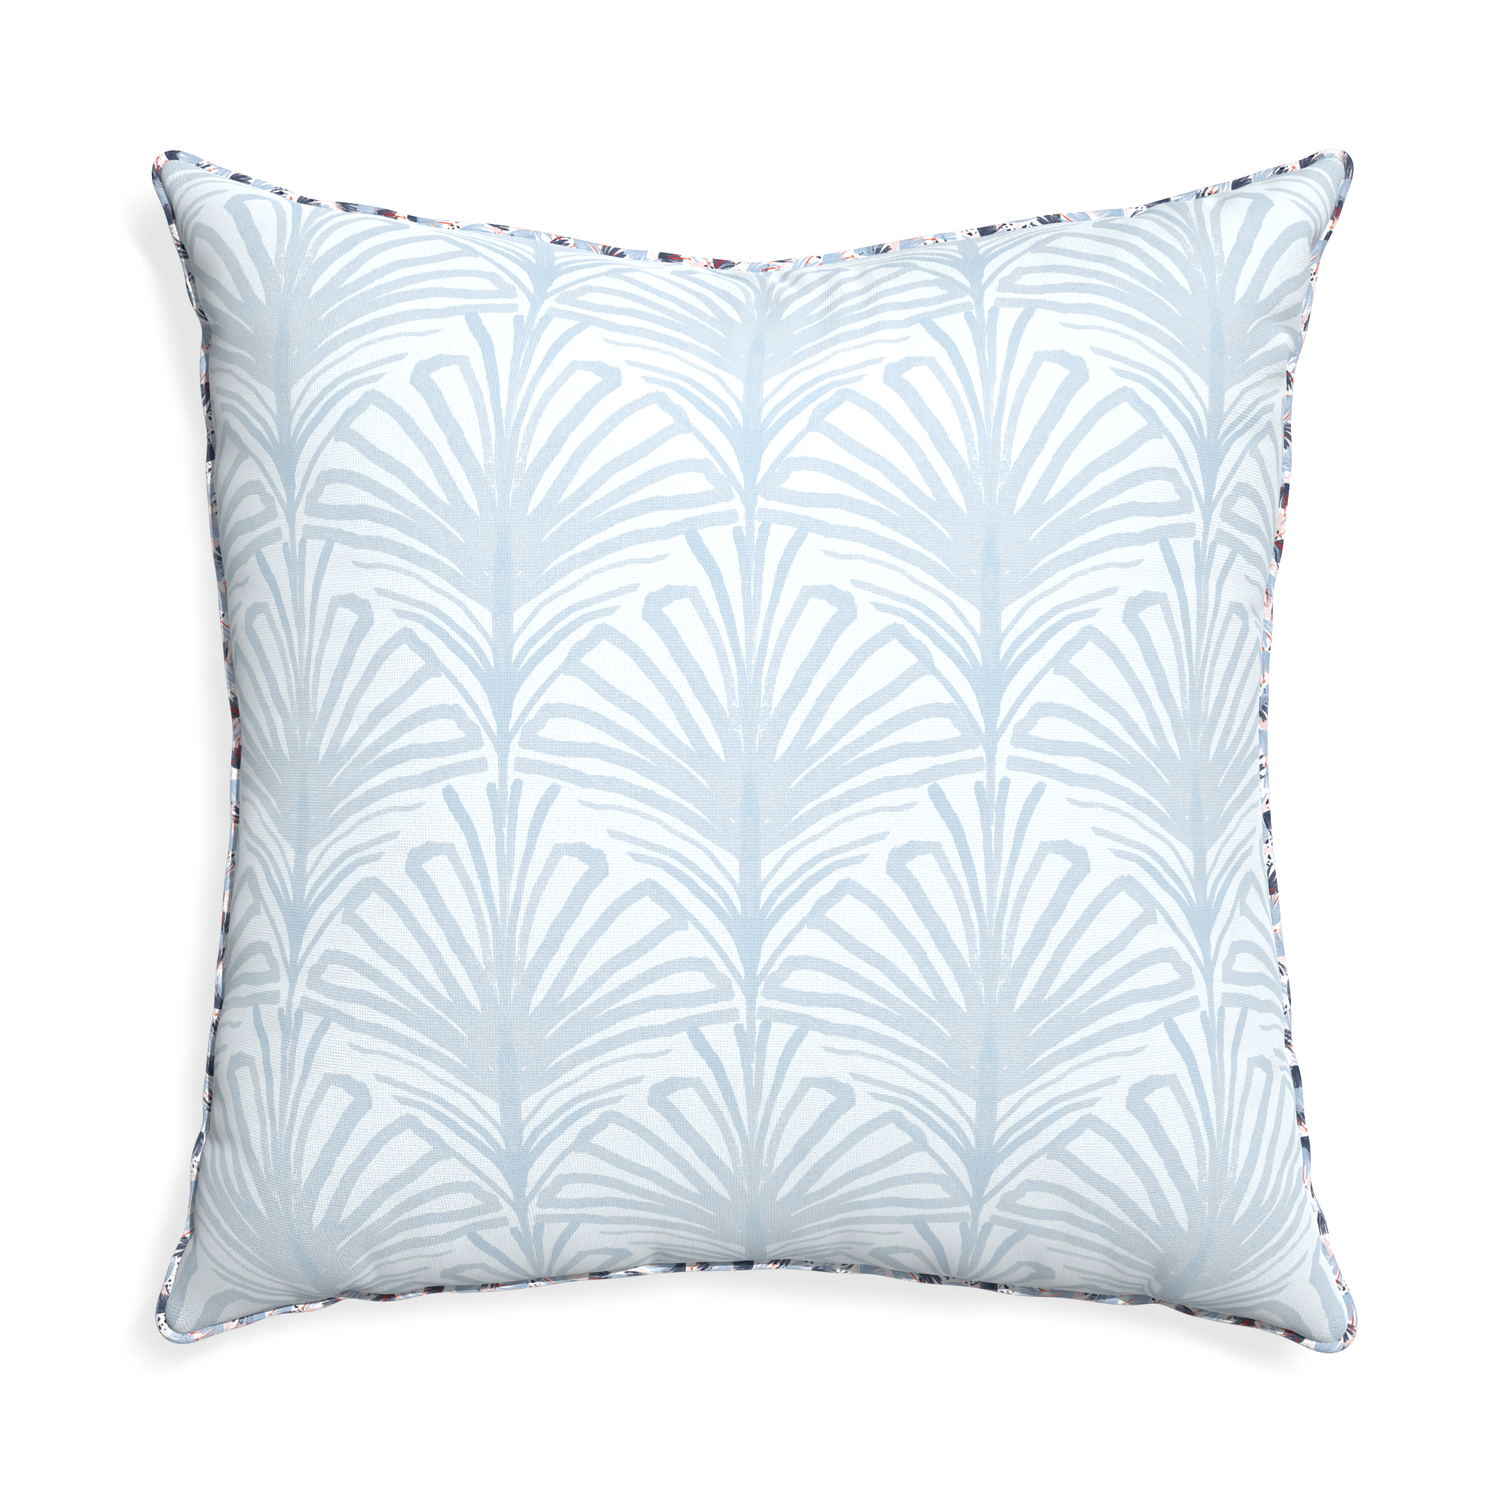 Euro-sham suzy sky custom pillow with e piping on white background